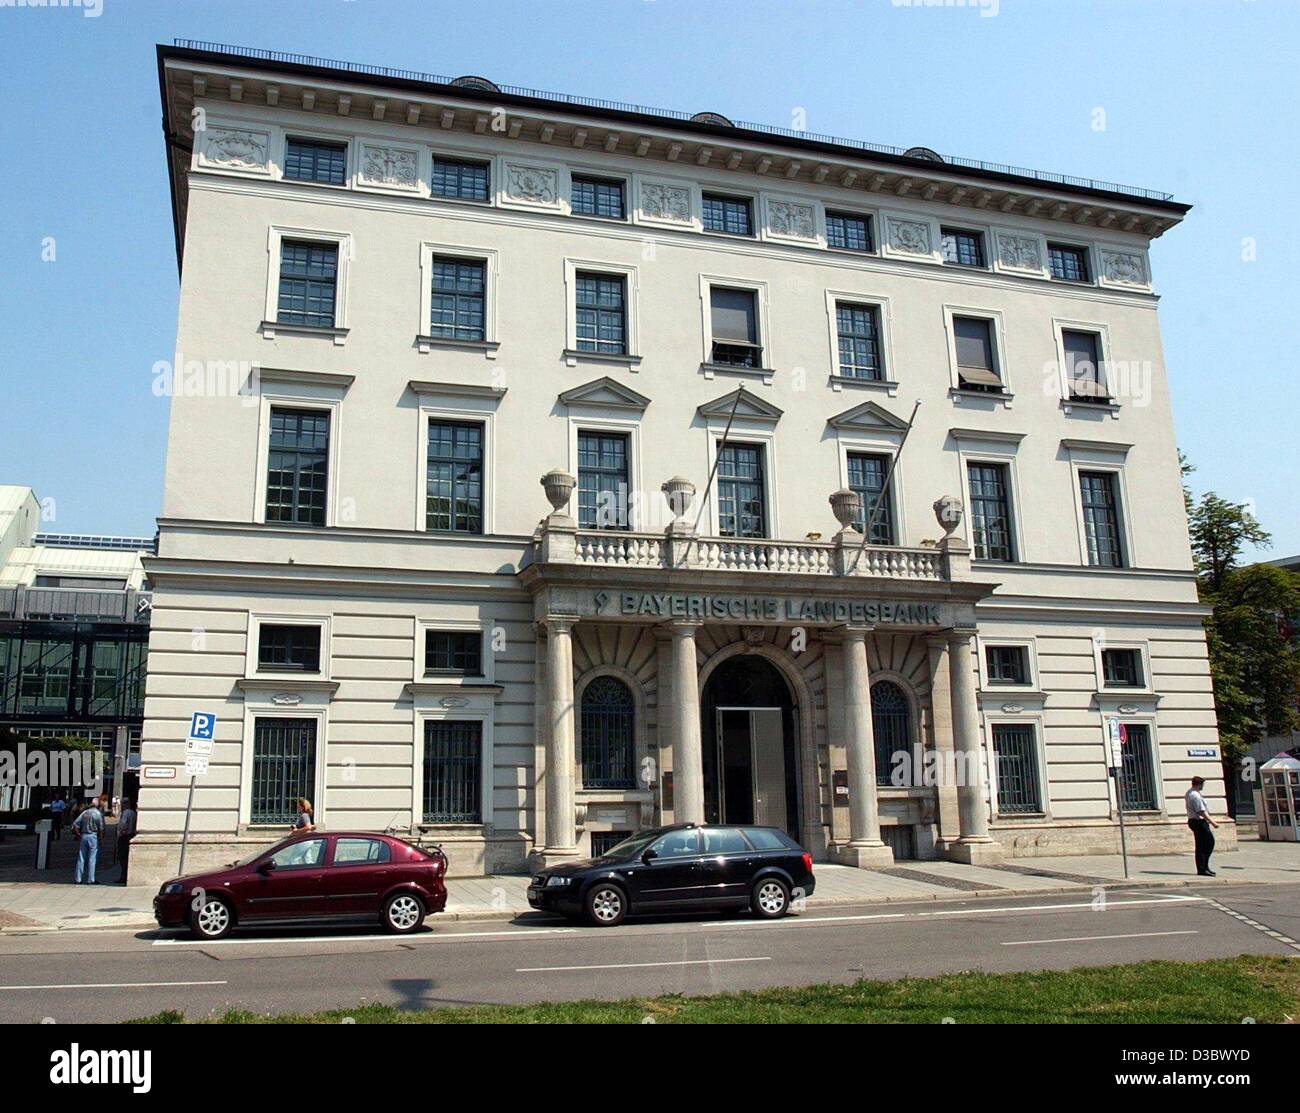 (dpa) - A view of the Bayerische Landesbank (Bavarian state bank) in Munich, 5 August 2003. Stock Photo